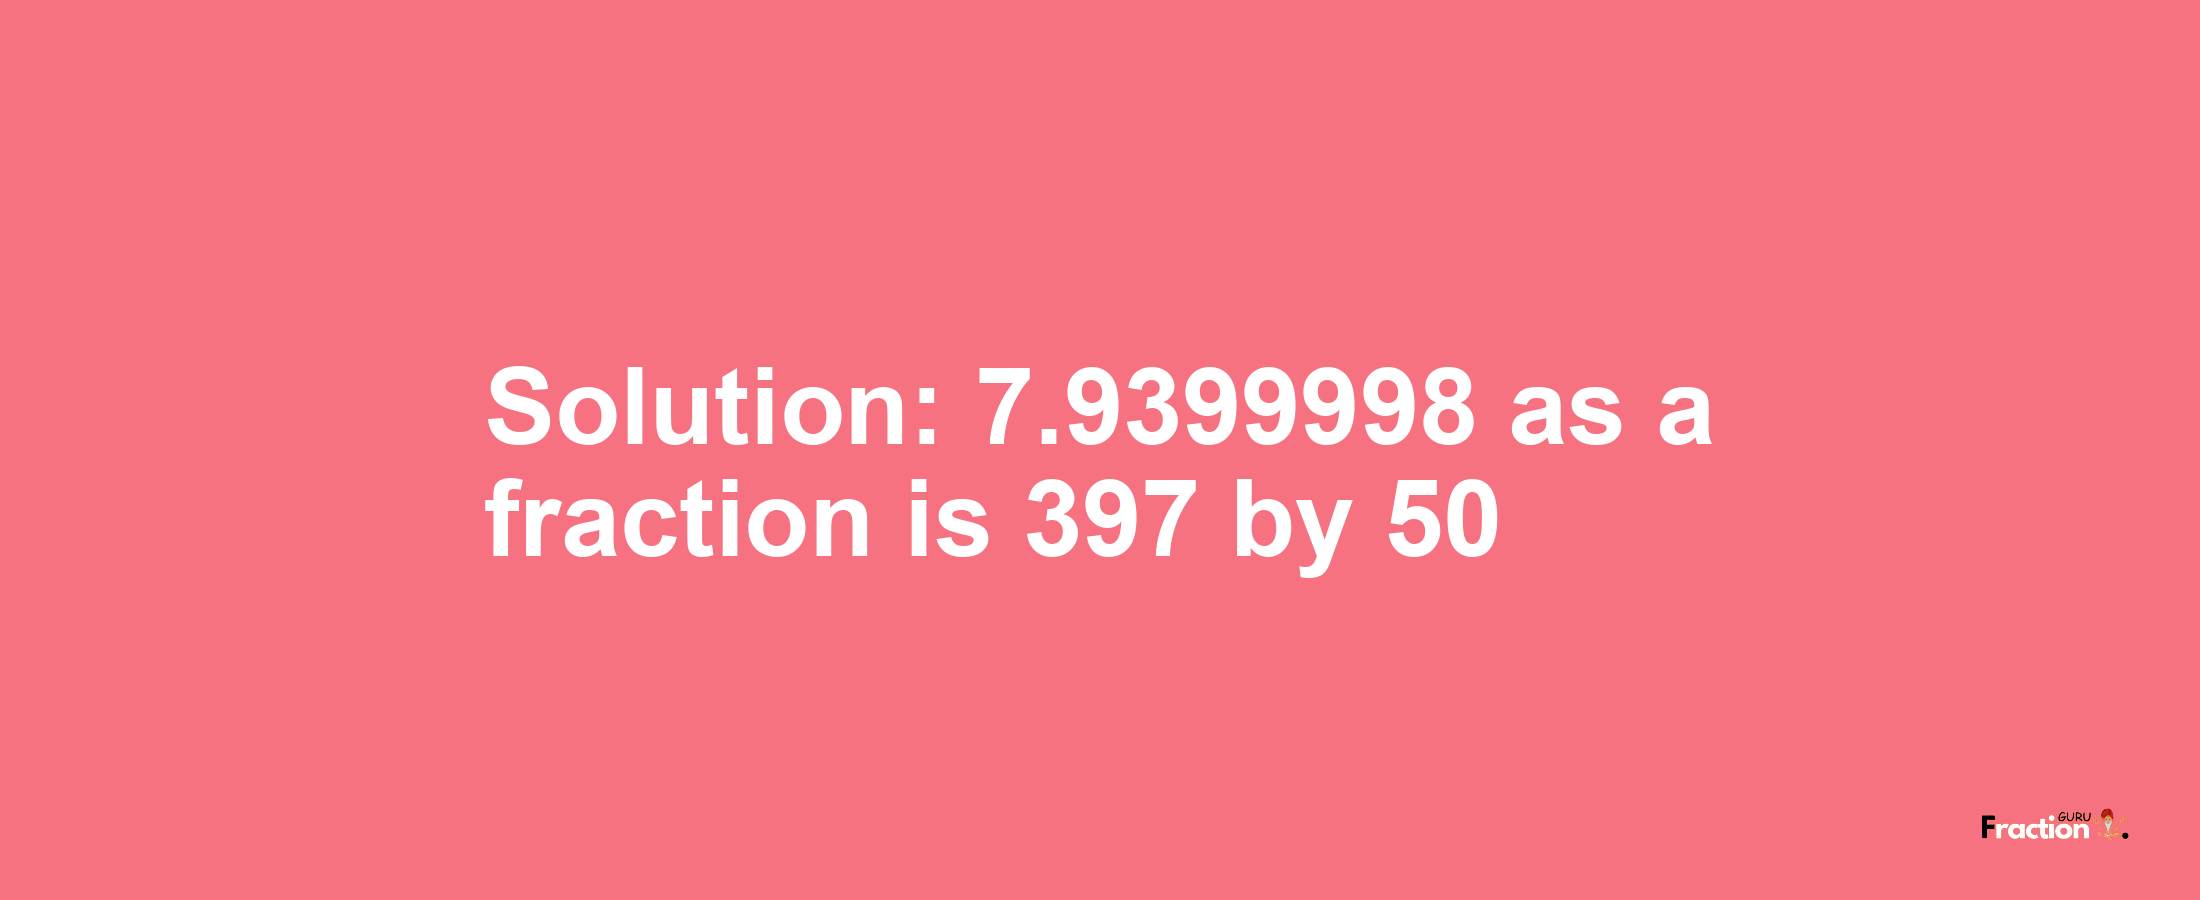 Solution:7.9399998 as a fraction is 397/50